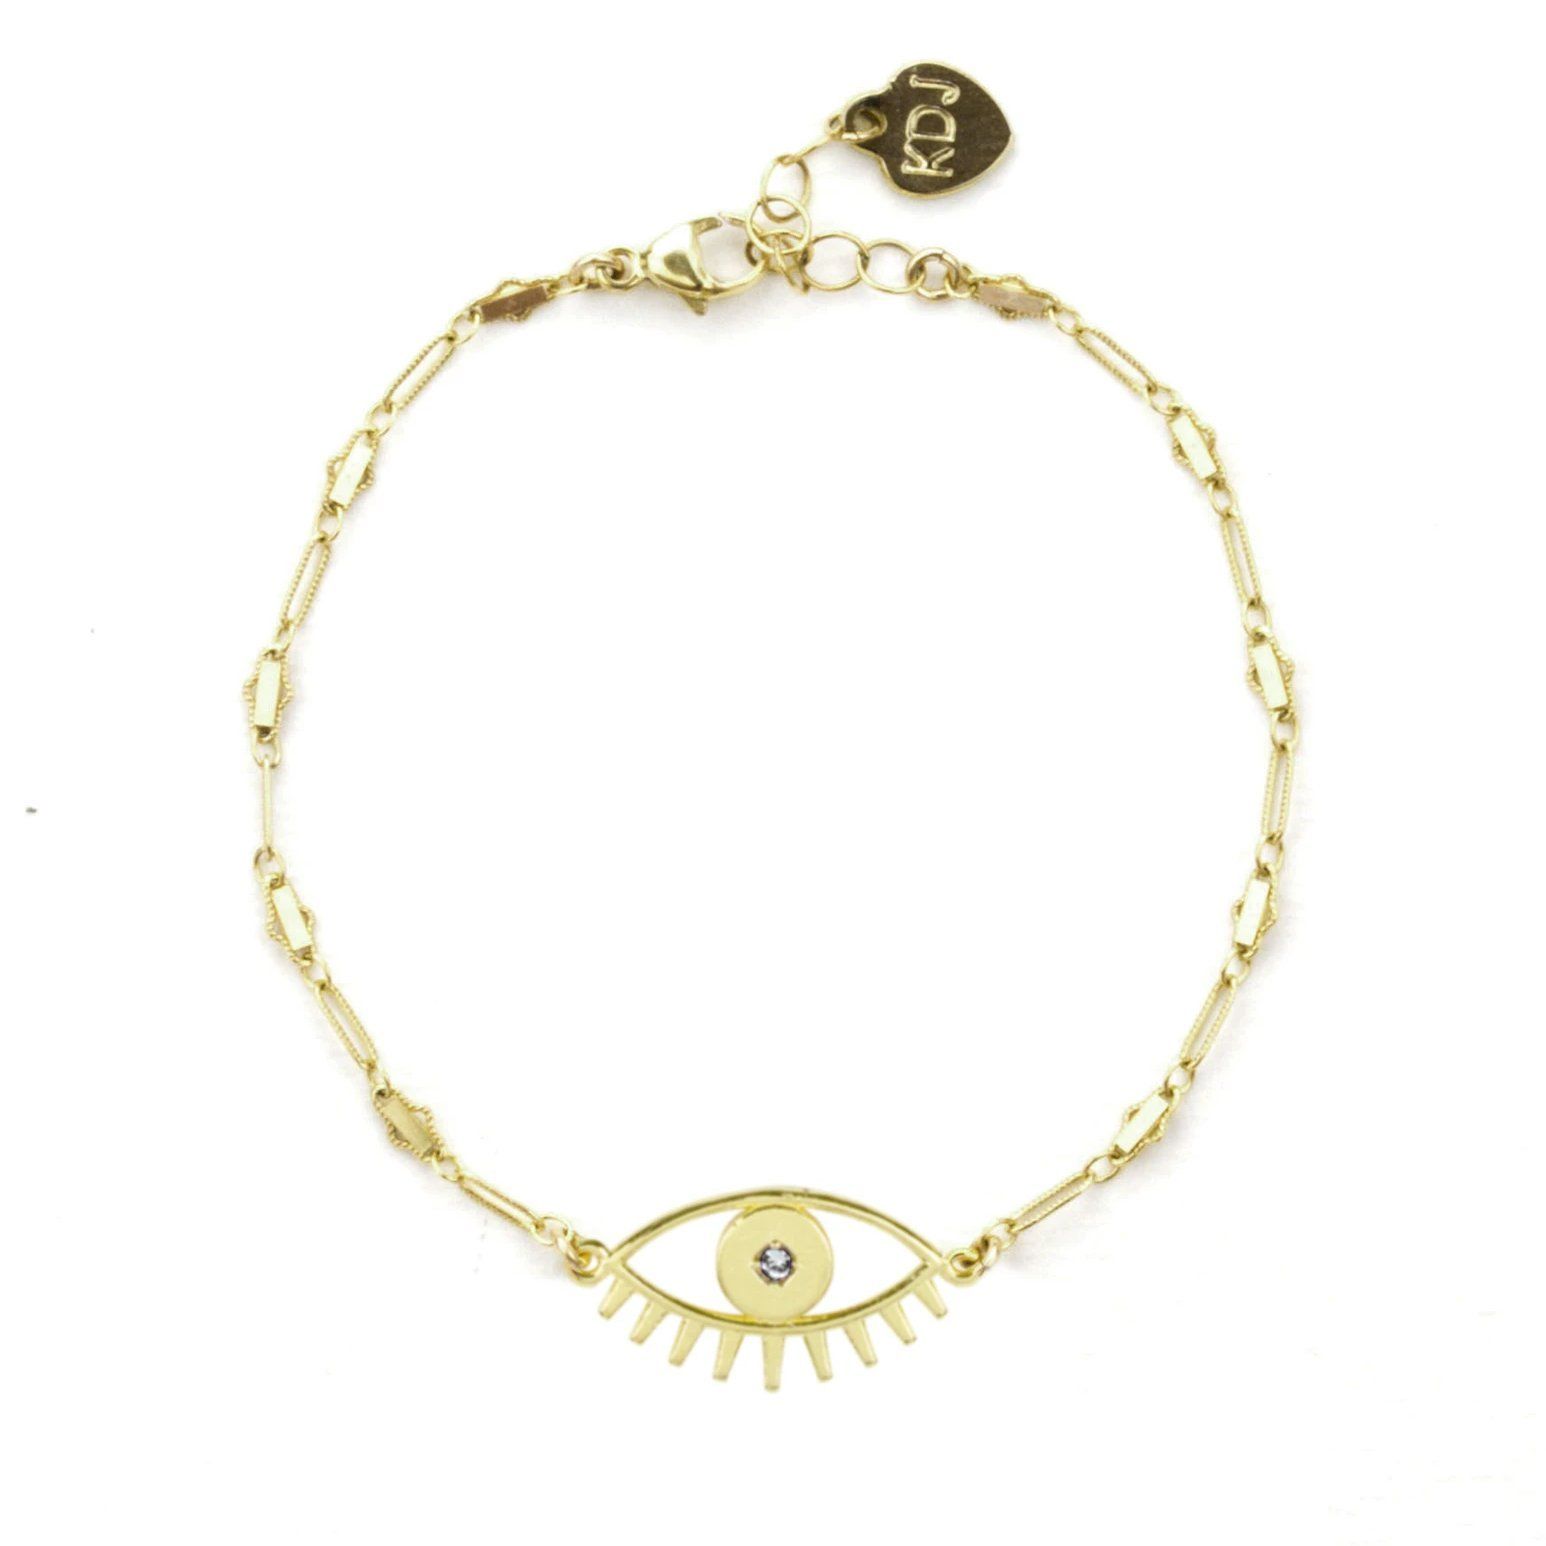 Keeping all bad juju away from you! Let this pretty Evil Eye Bracelet protect you from bad vibes and spread the love to one and all.  Handmade in California by Katie Dean Jewelry.